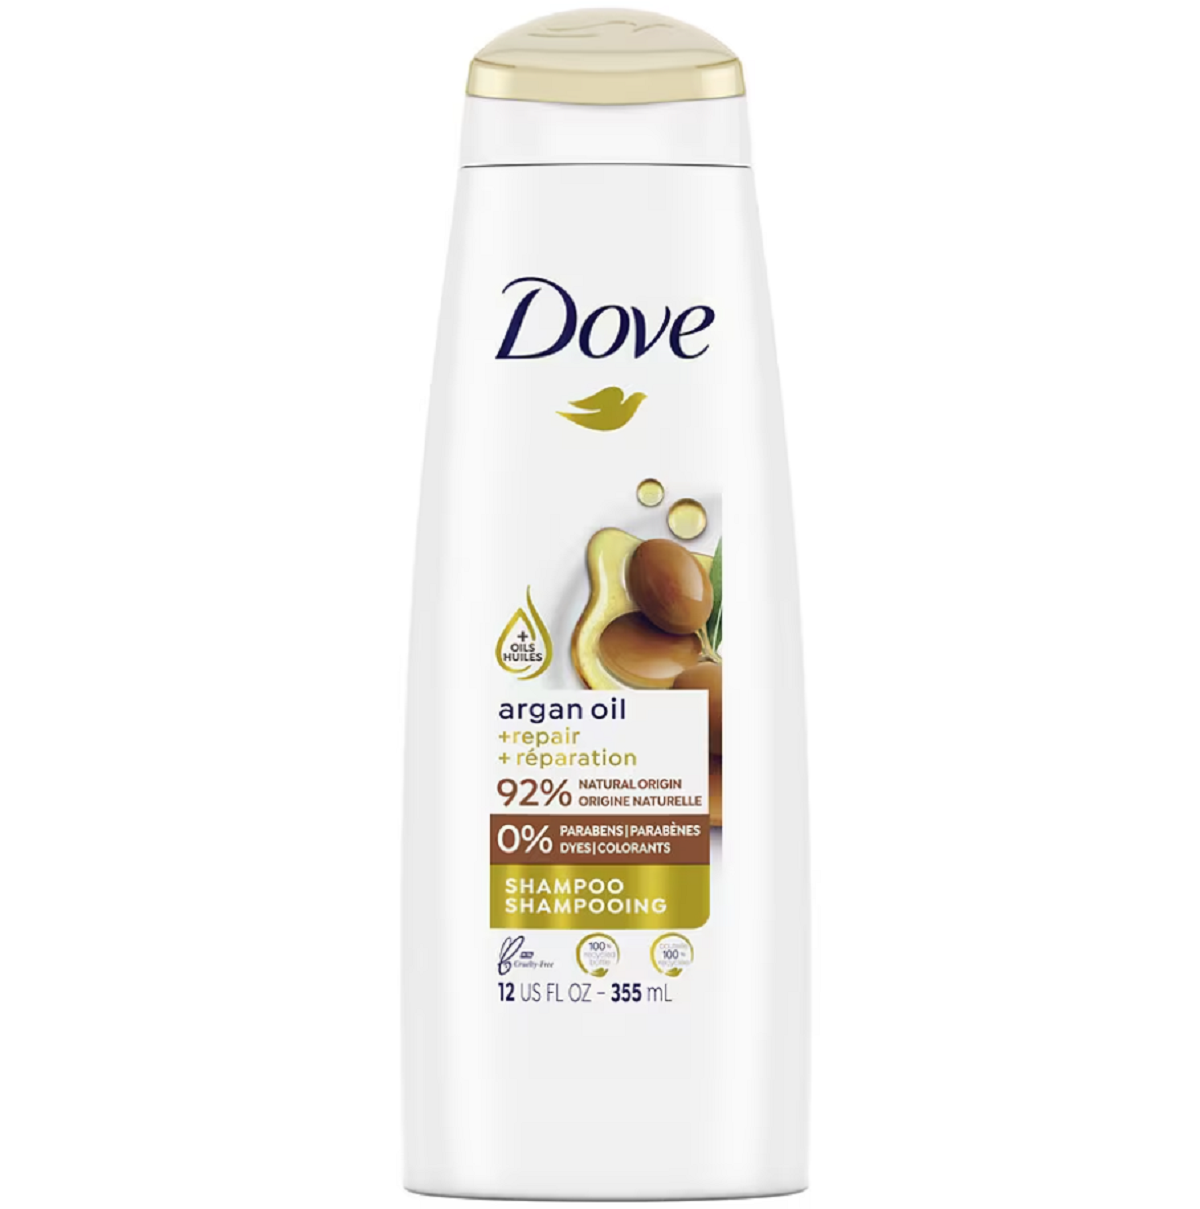 $2 Off Dove Hair Care Product Coupon